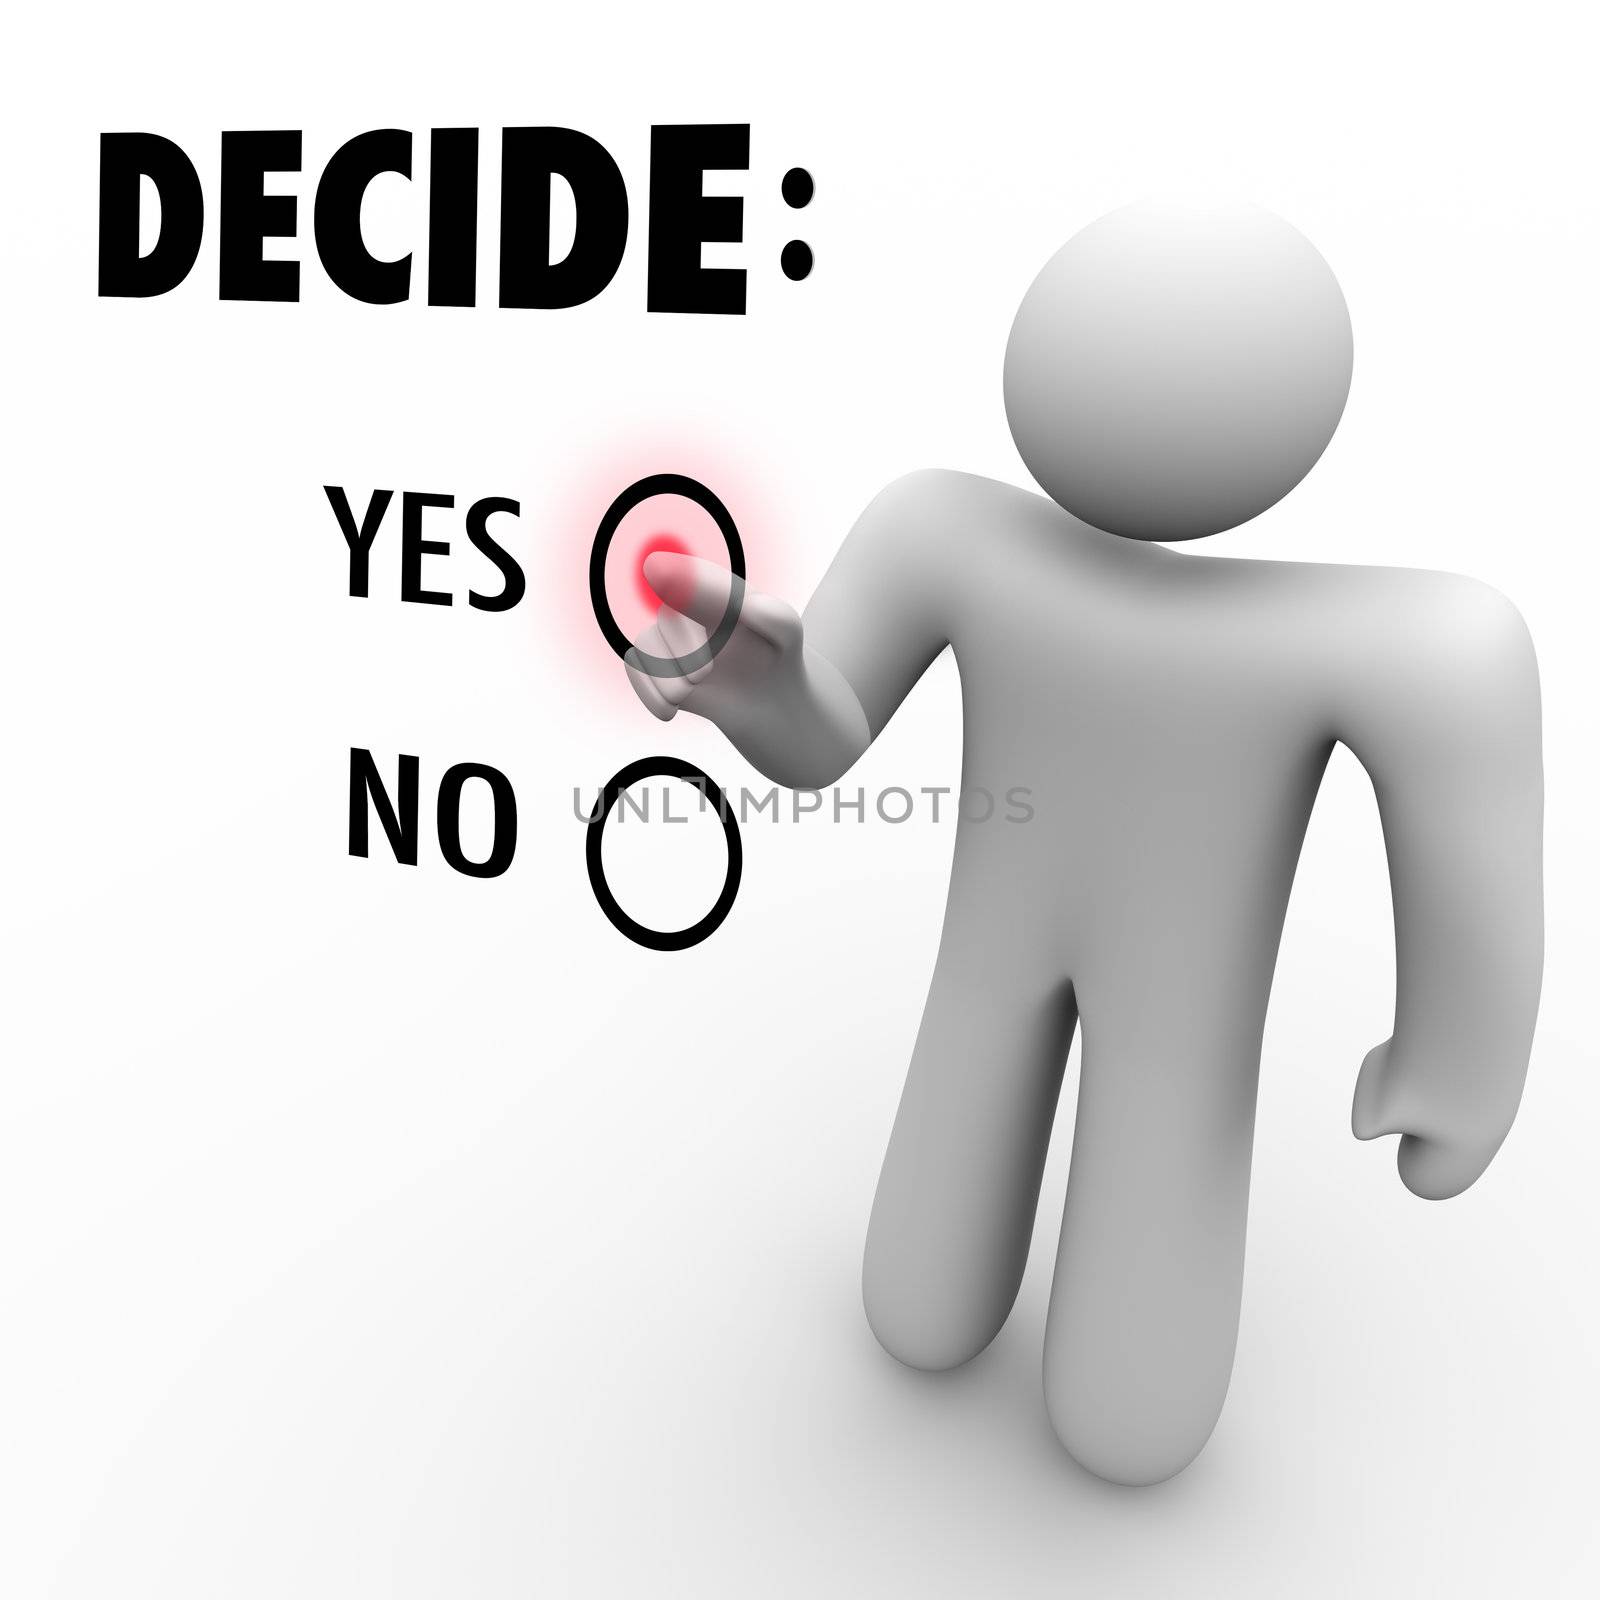 A man presses a button beside the word Yes when asked to choose between Yes and No